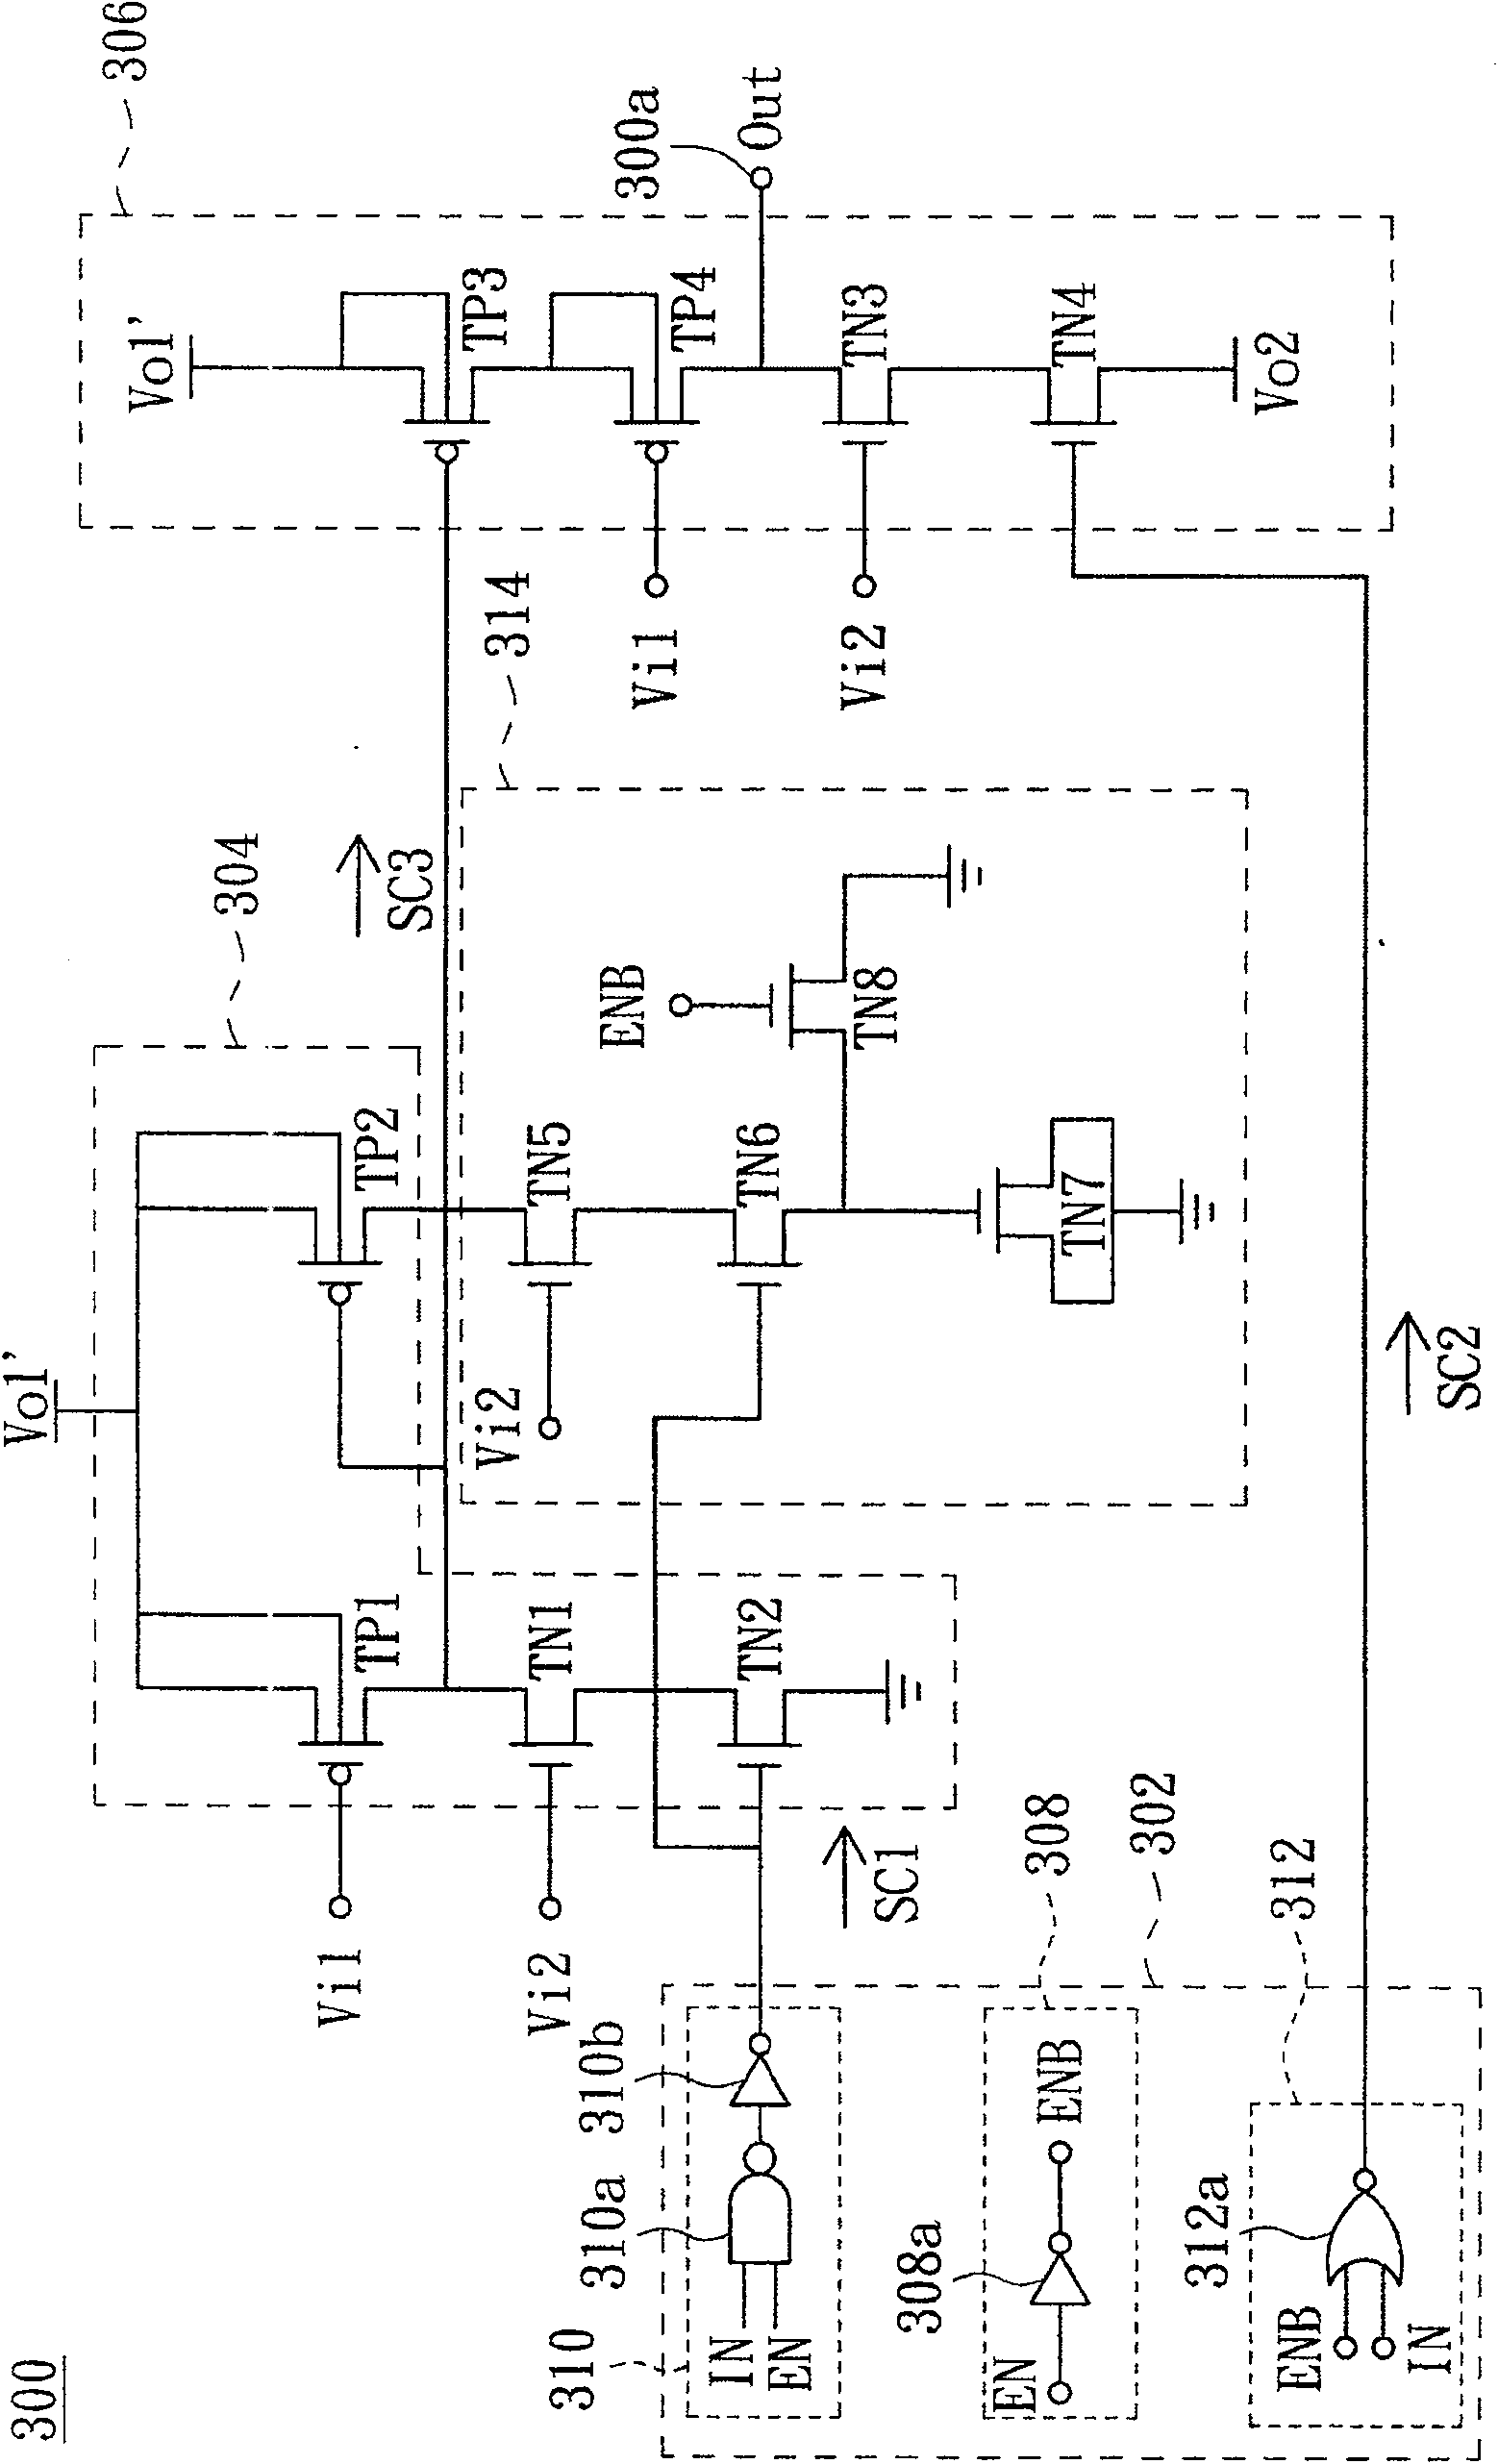 Tri-state buffer prepared from low voltage complementary metal oxide semiconductor